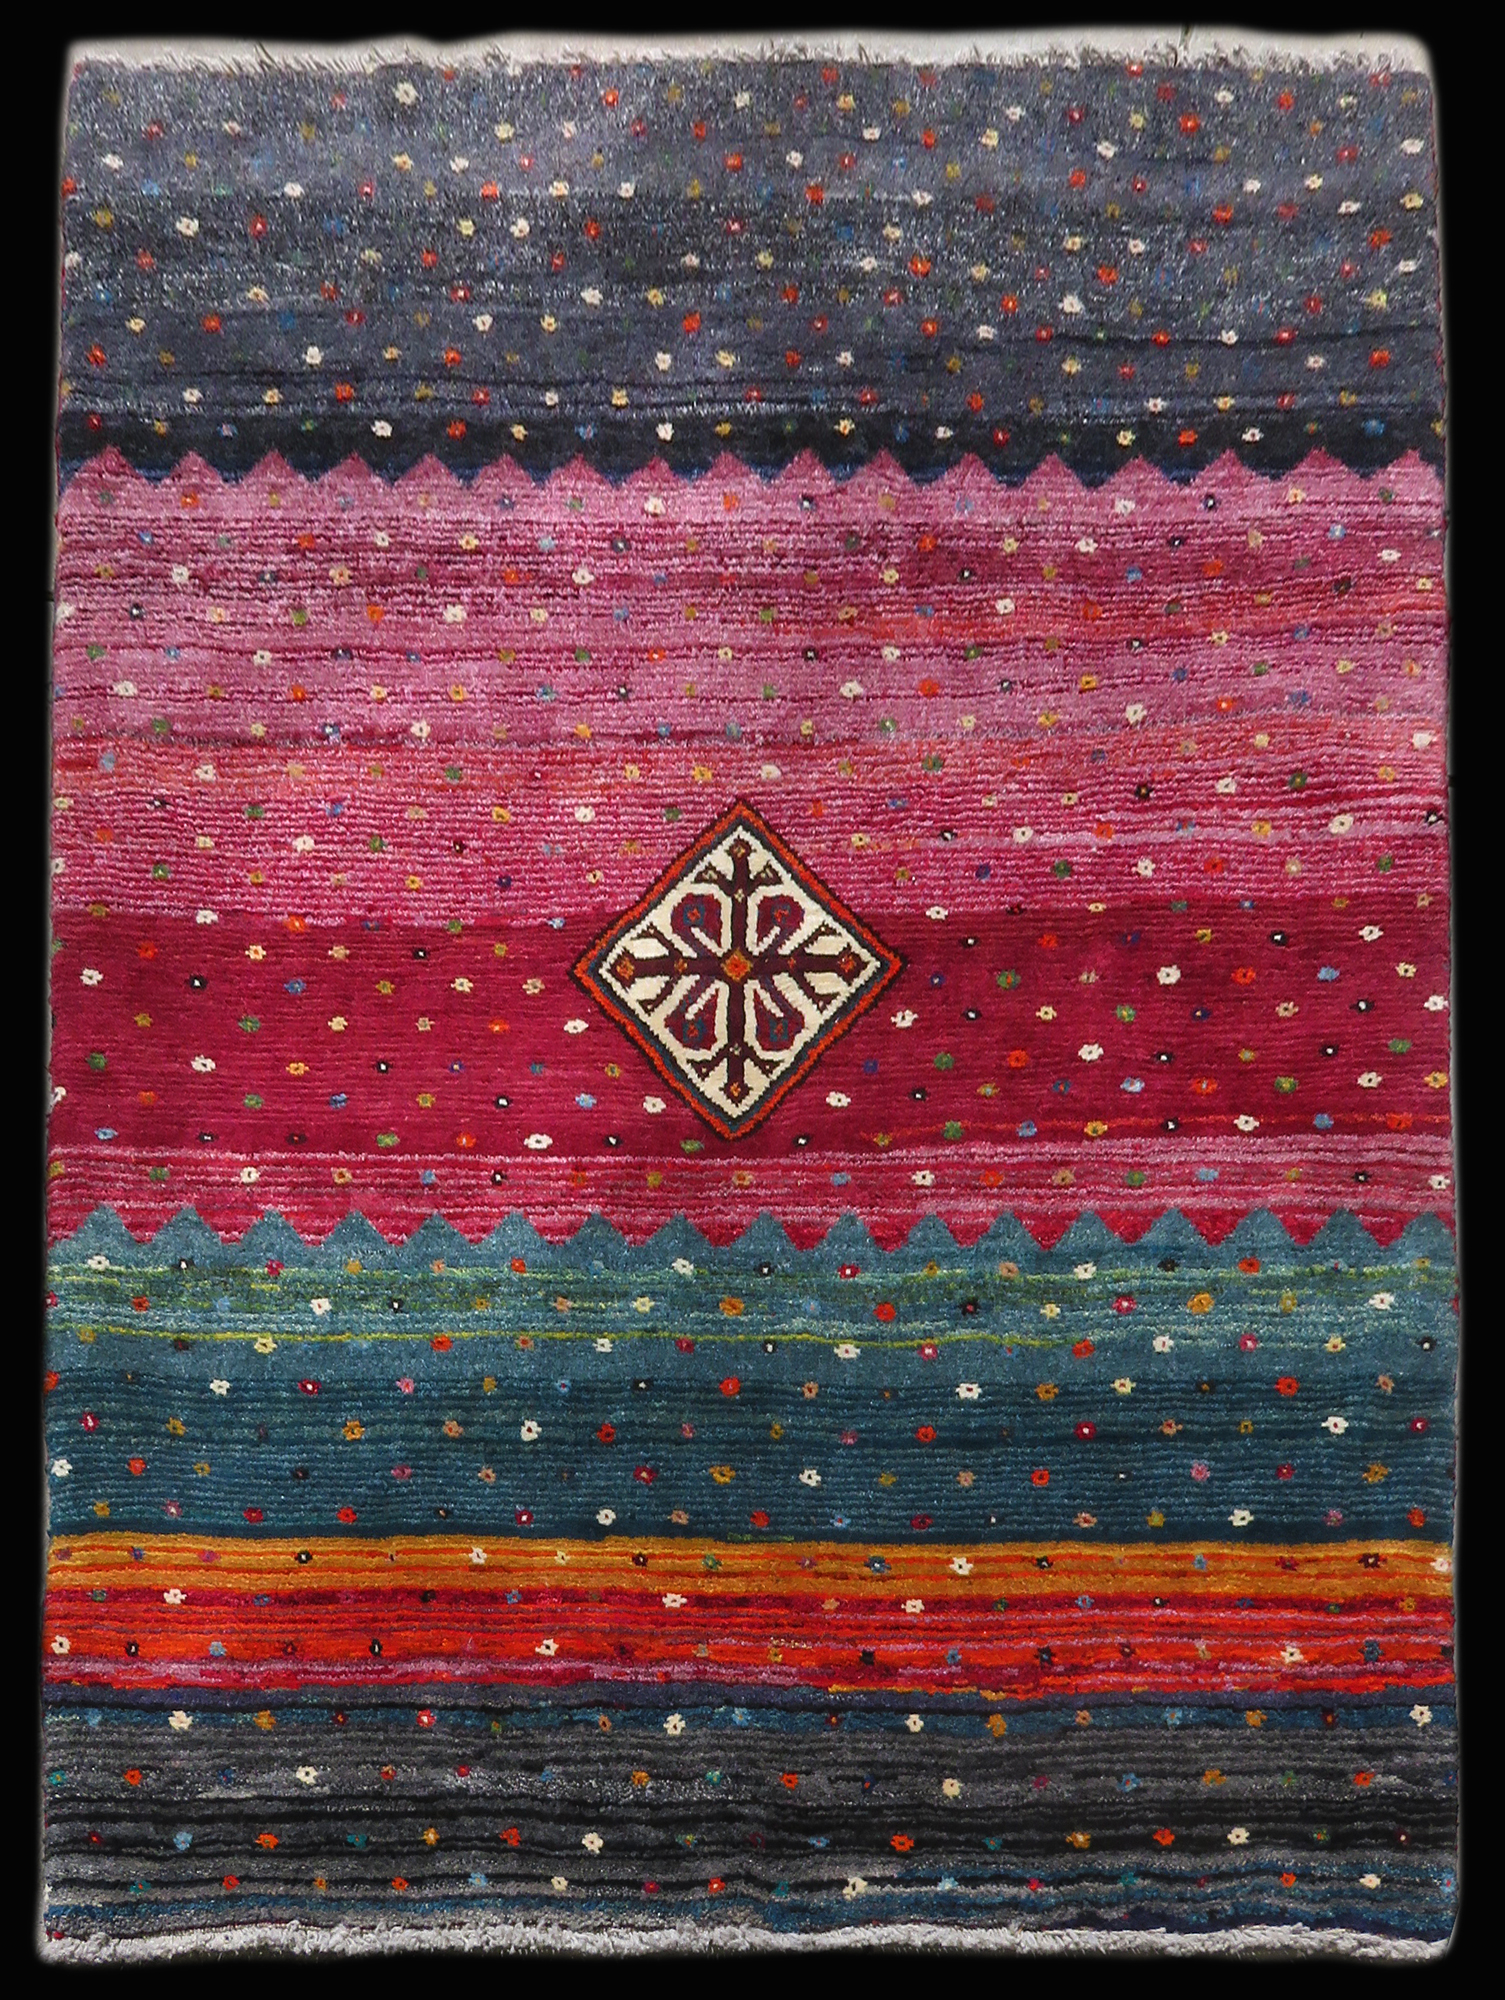 an Authentic Hand Knotted Gabbeh Rug 4'0 x 6'0 Double Knot Gabbeh Design Area Rug with Wool Pile a 4x6 Medium Rug 